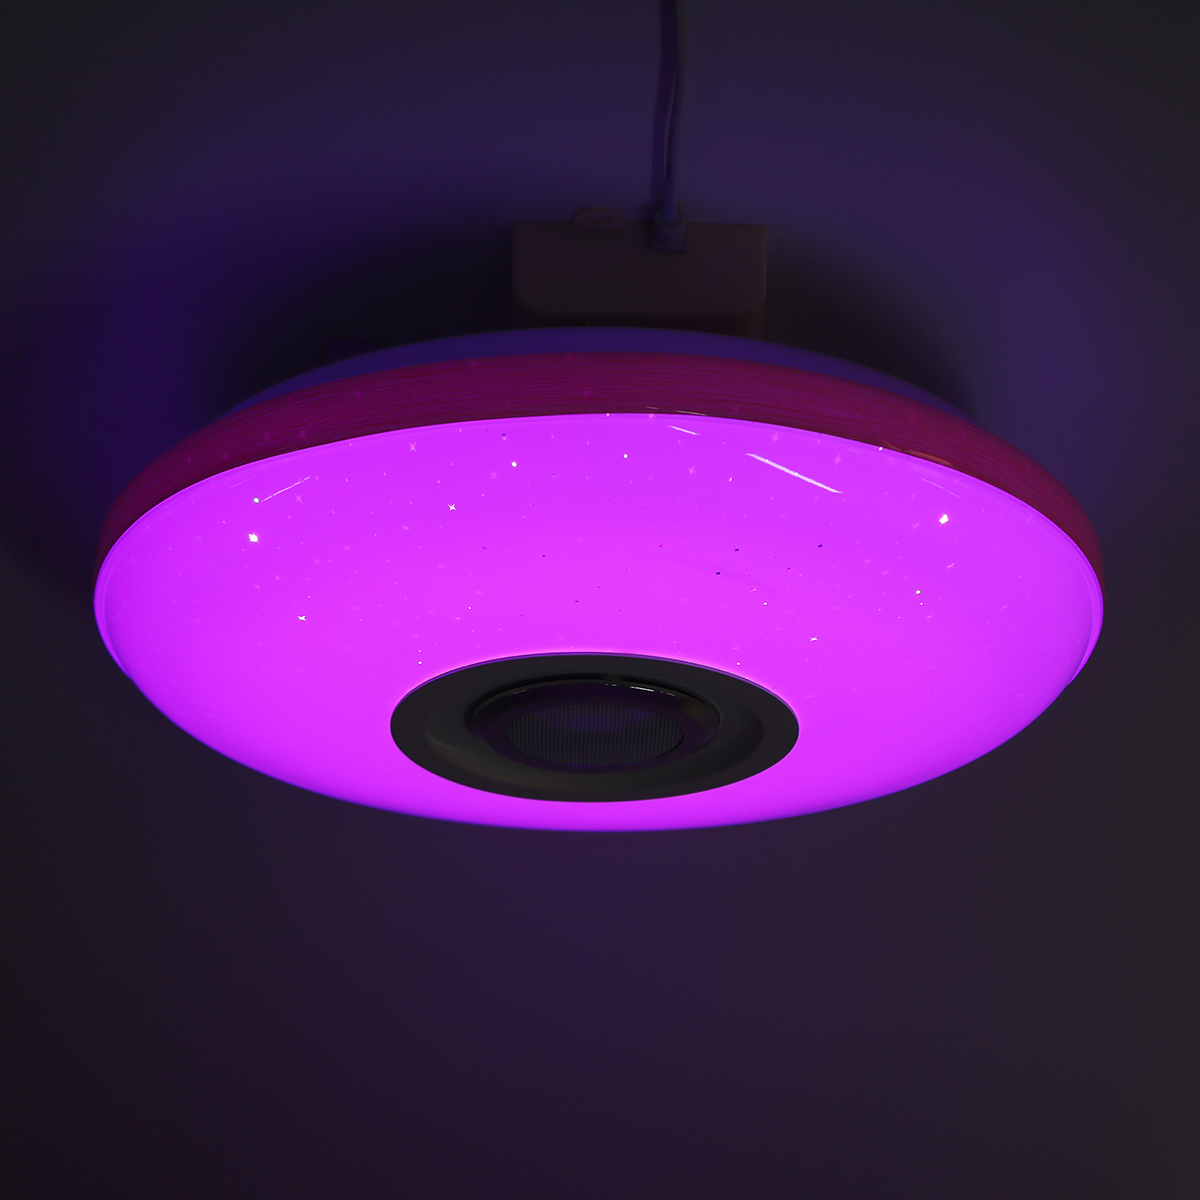 120W-LED-Ceiling-Lamp-Bluetooth-Music-Speaker-Dimmable-RGB-Light-Remote-Control-1722148-10